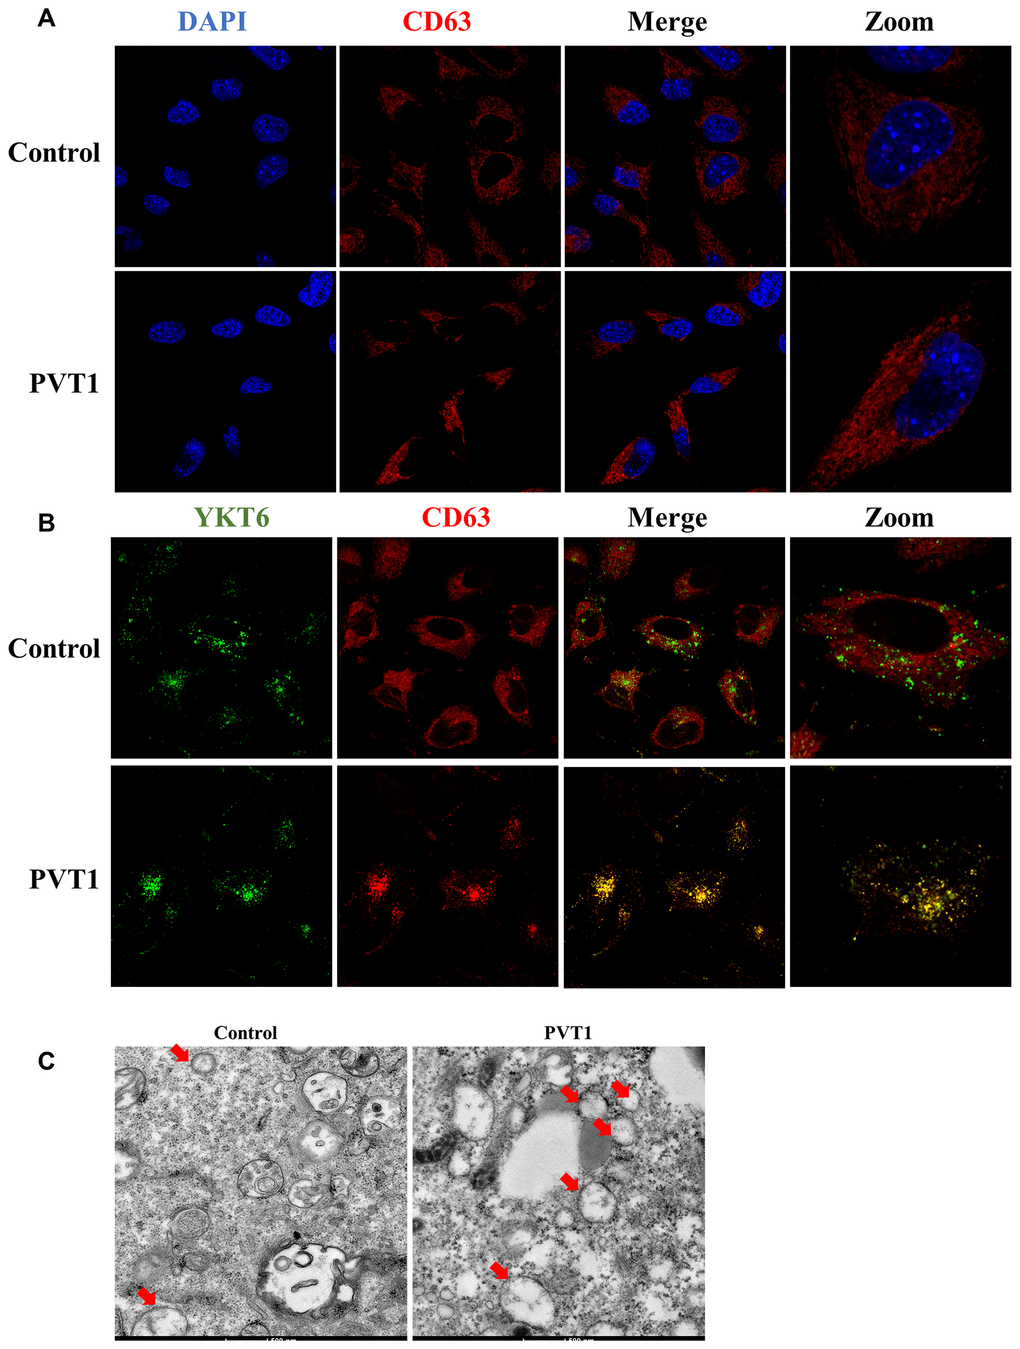 PVT1 promotes the movement of MVBs towards the plasma membrane. (A) Analysis of CD63 (red) in PVT1-overexpressing HS766T cells, as determined by confocal microscope. Nuclei were labeled with DAPI (blue). (B) Analysis of YKT6 (green) and CD63 (red) in PVT1-overexpressing HS766T cells, as determined by confocal microscope. (C) Exosomes in PVT1-overexpressing HS766T cells, as determined by electron microscope.